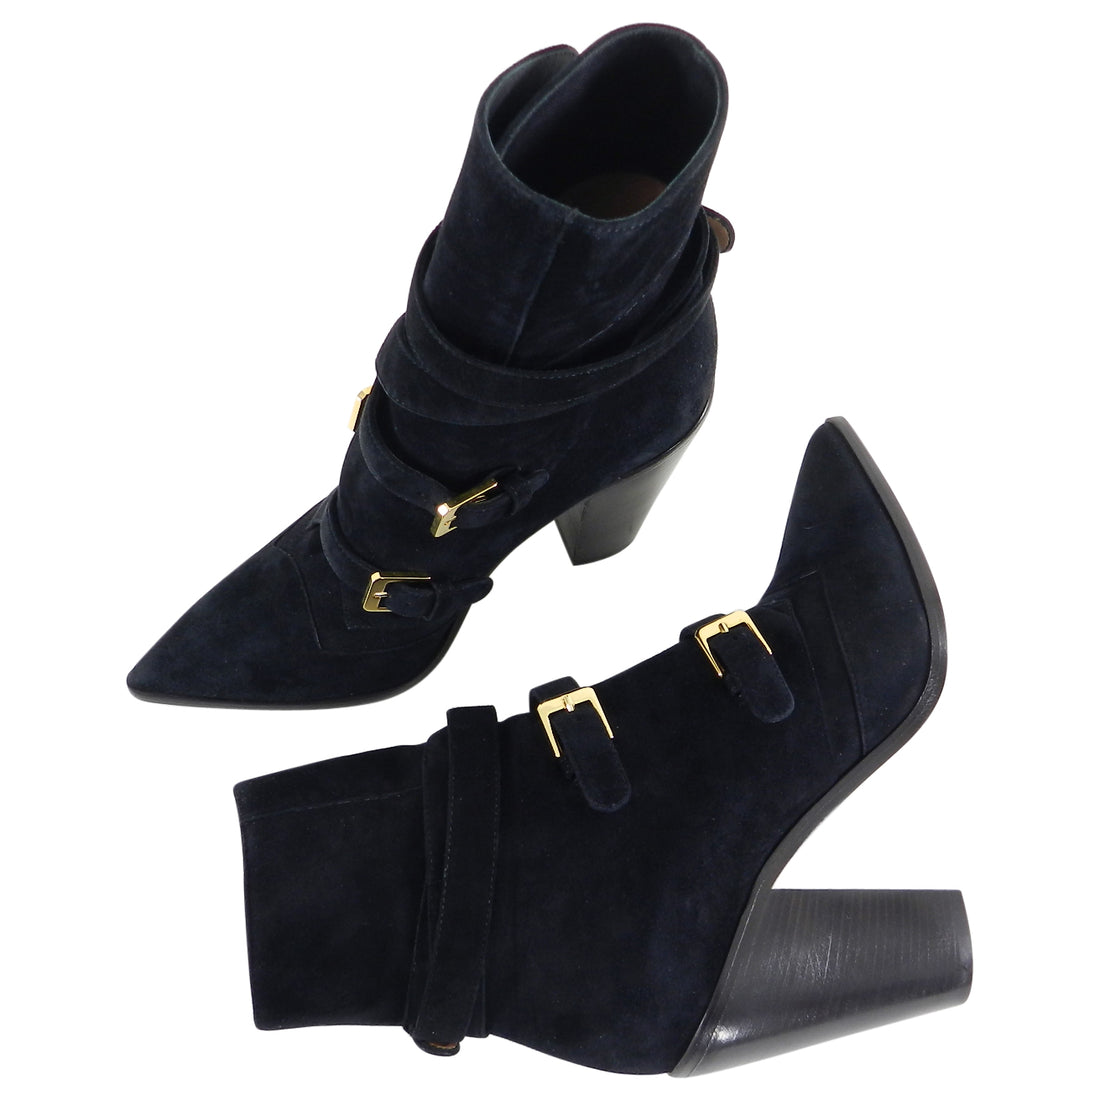 Laurence Dacade Black Suede and Gold Buckle Gregoria Ankle Boots - 37